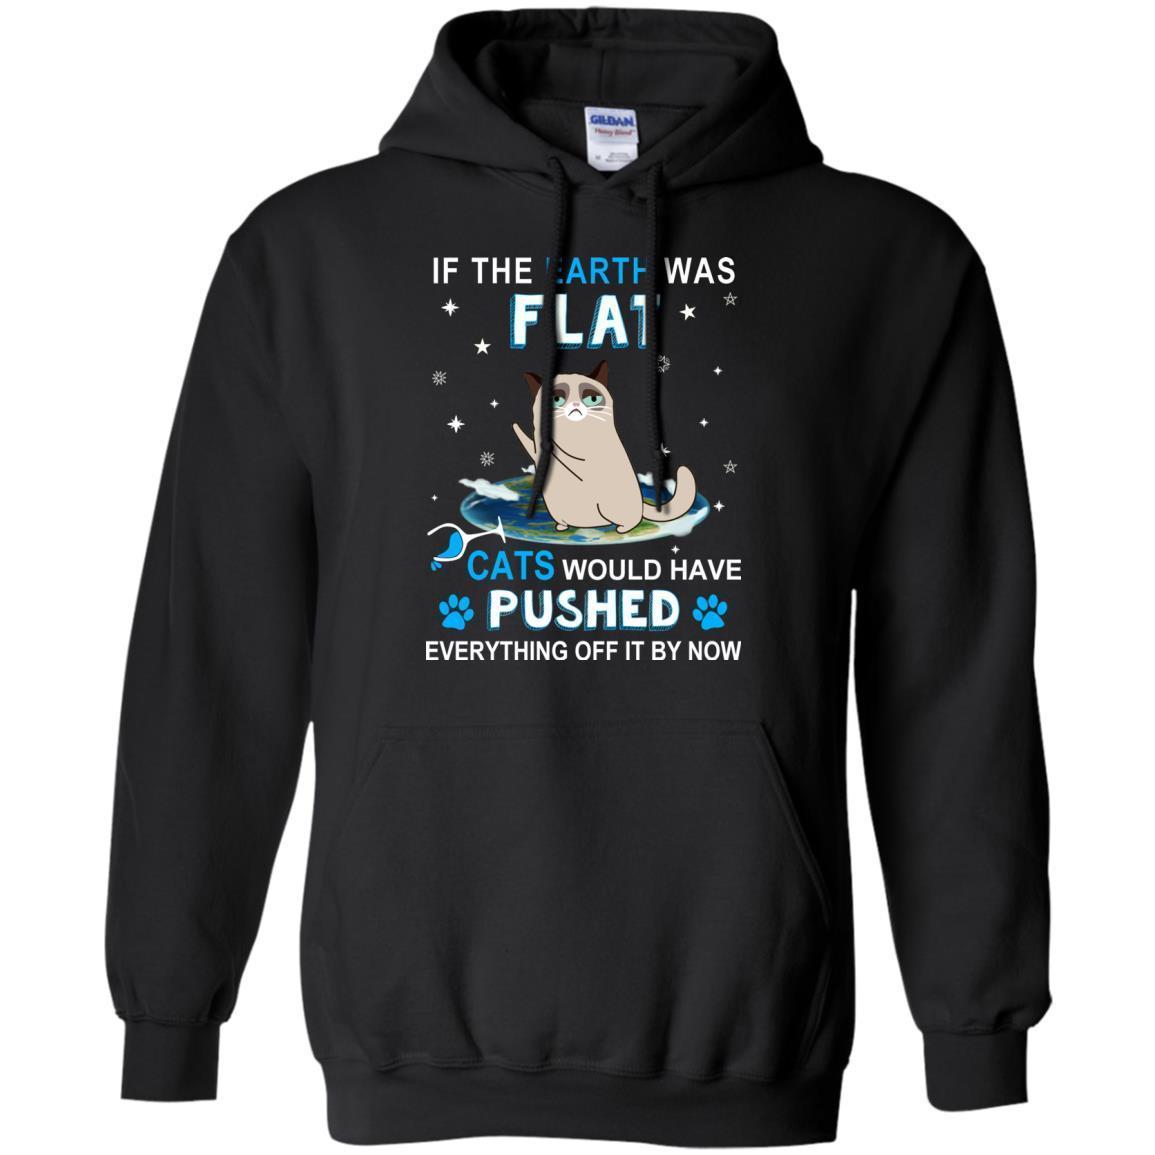 If The Earth Was Flat Cats Would Have Pushed Everything Off It By Now Shirts